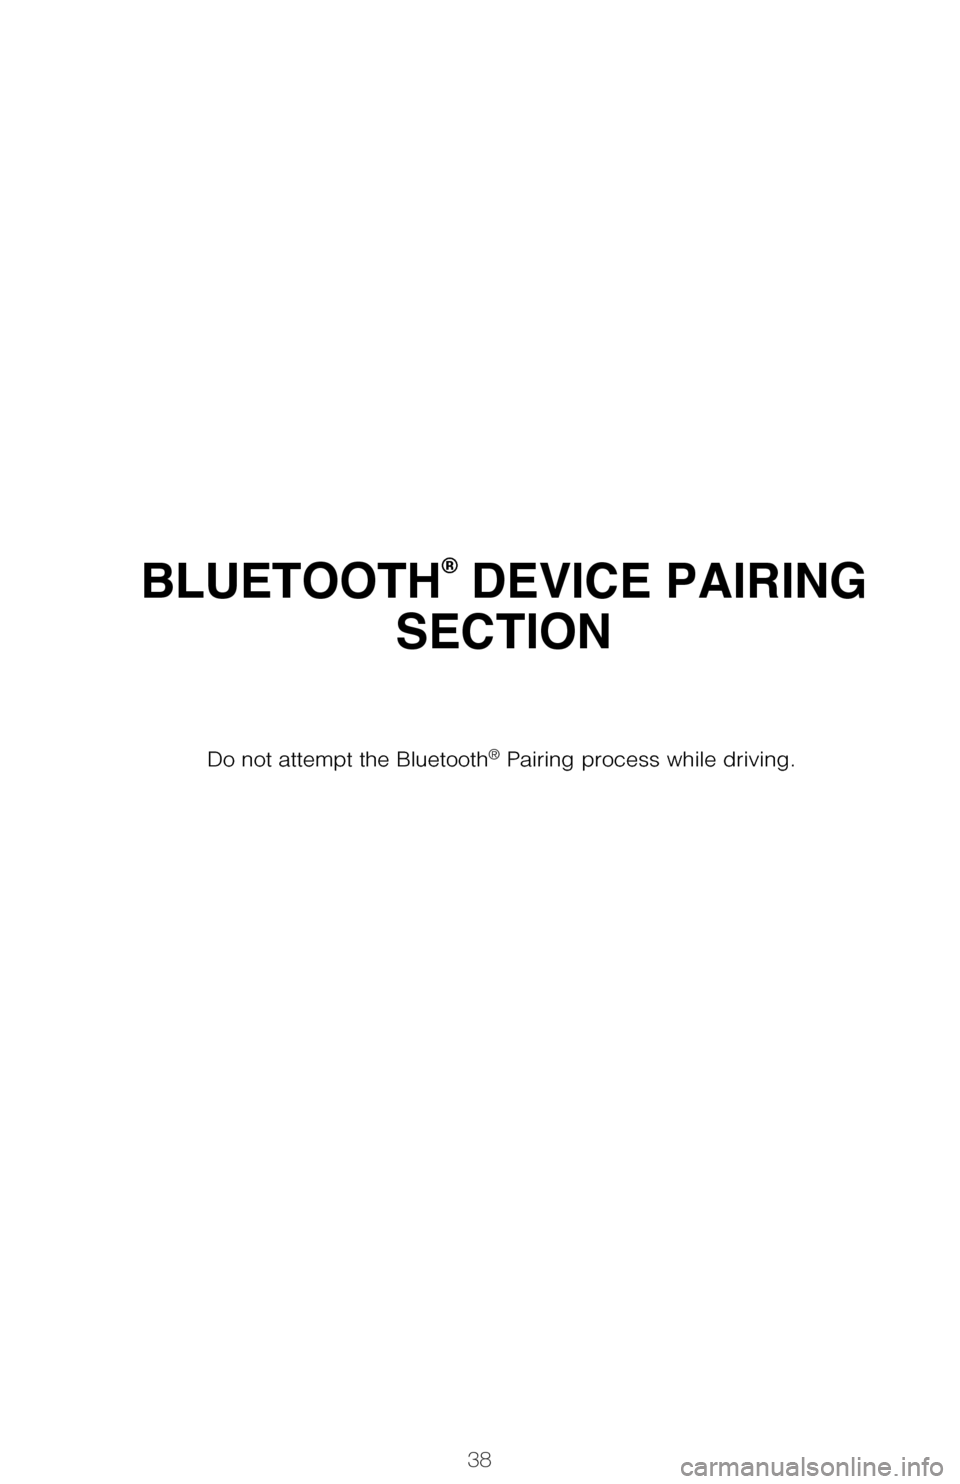 TOYOTA COROLLA 2017 11.G Quick Reference Guide 38
BLUETOOTH® DEVICE PAIRING 
SECTION
Do not attempt the Bluetooth® Pairing process while driving.
106535_2017_Corolla_QRG_D7_1_R1.indd   389/29/16   11:24 AM 